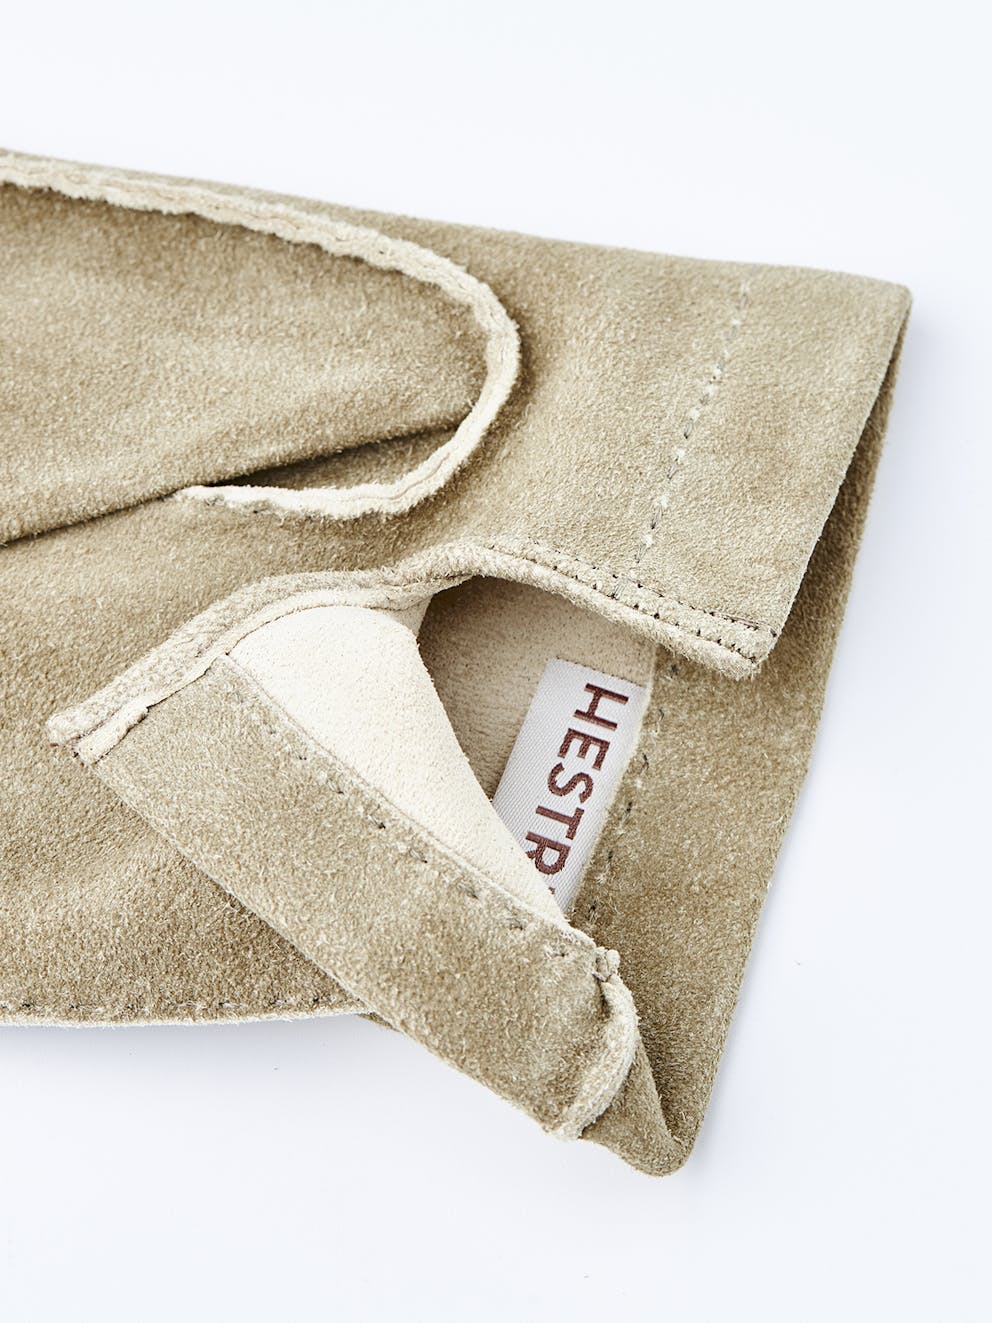 Chamois Sand Gloves - Handsewn Hestra Unlined |